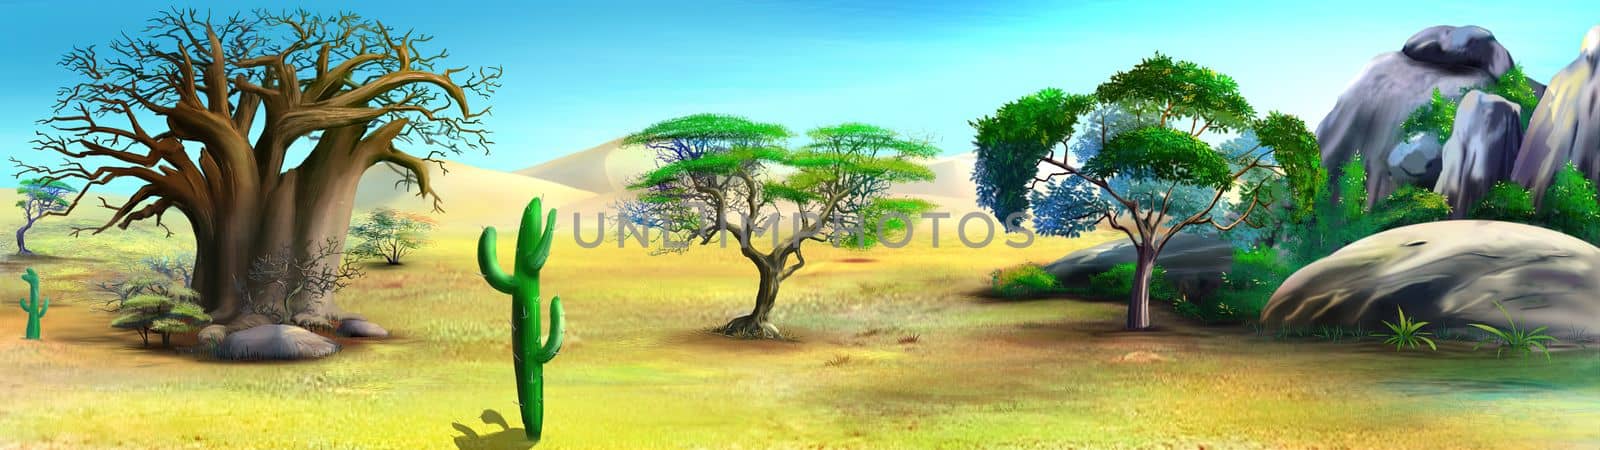 Savannah landscape with trees and rocks illustration by Multipedia